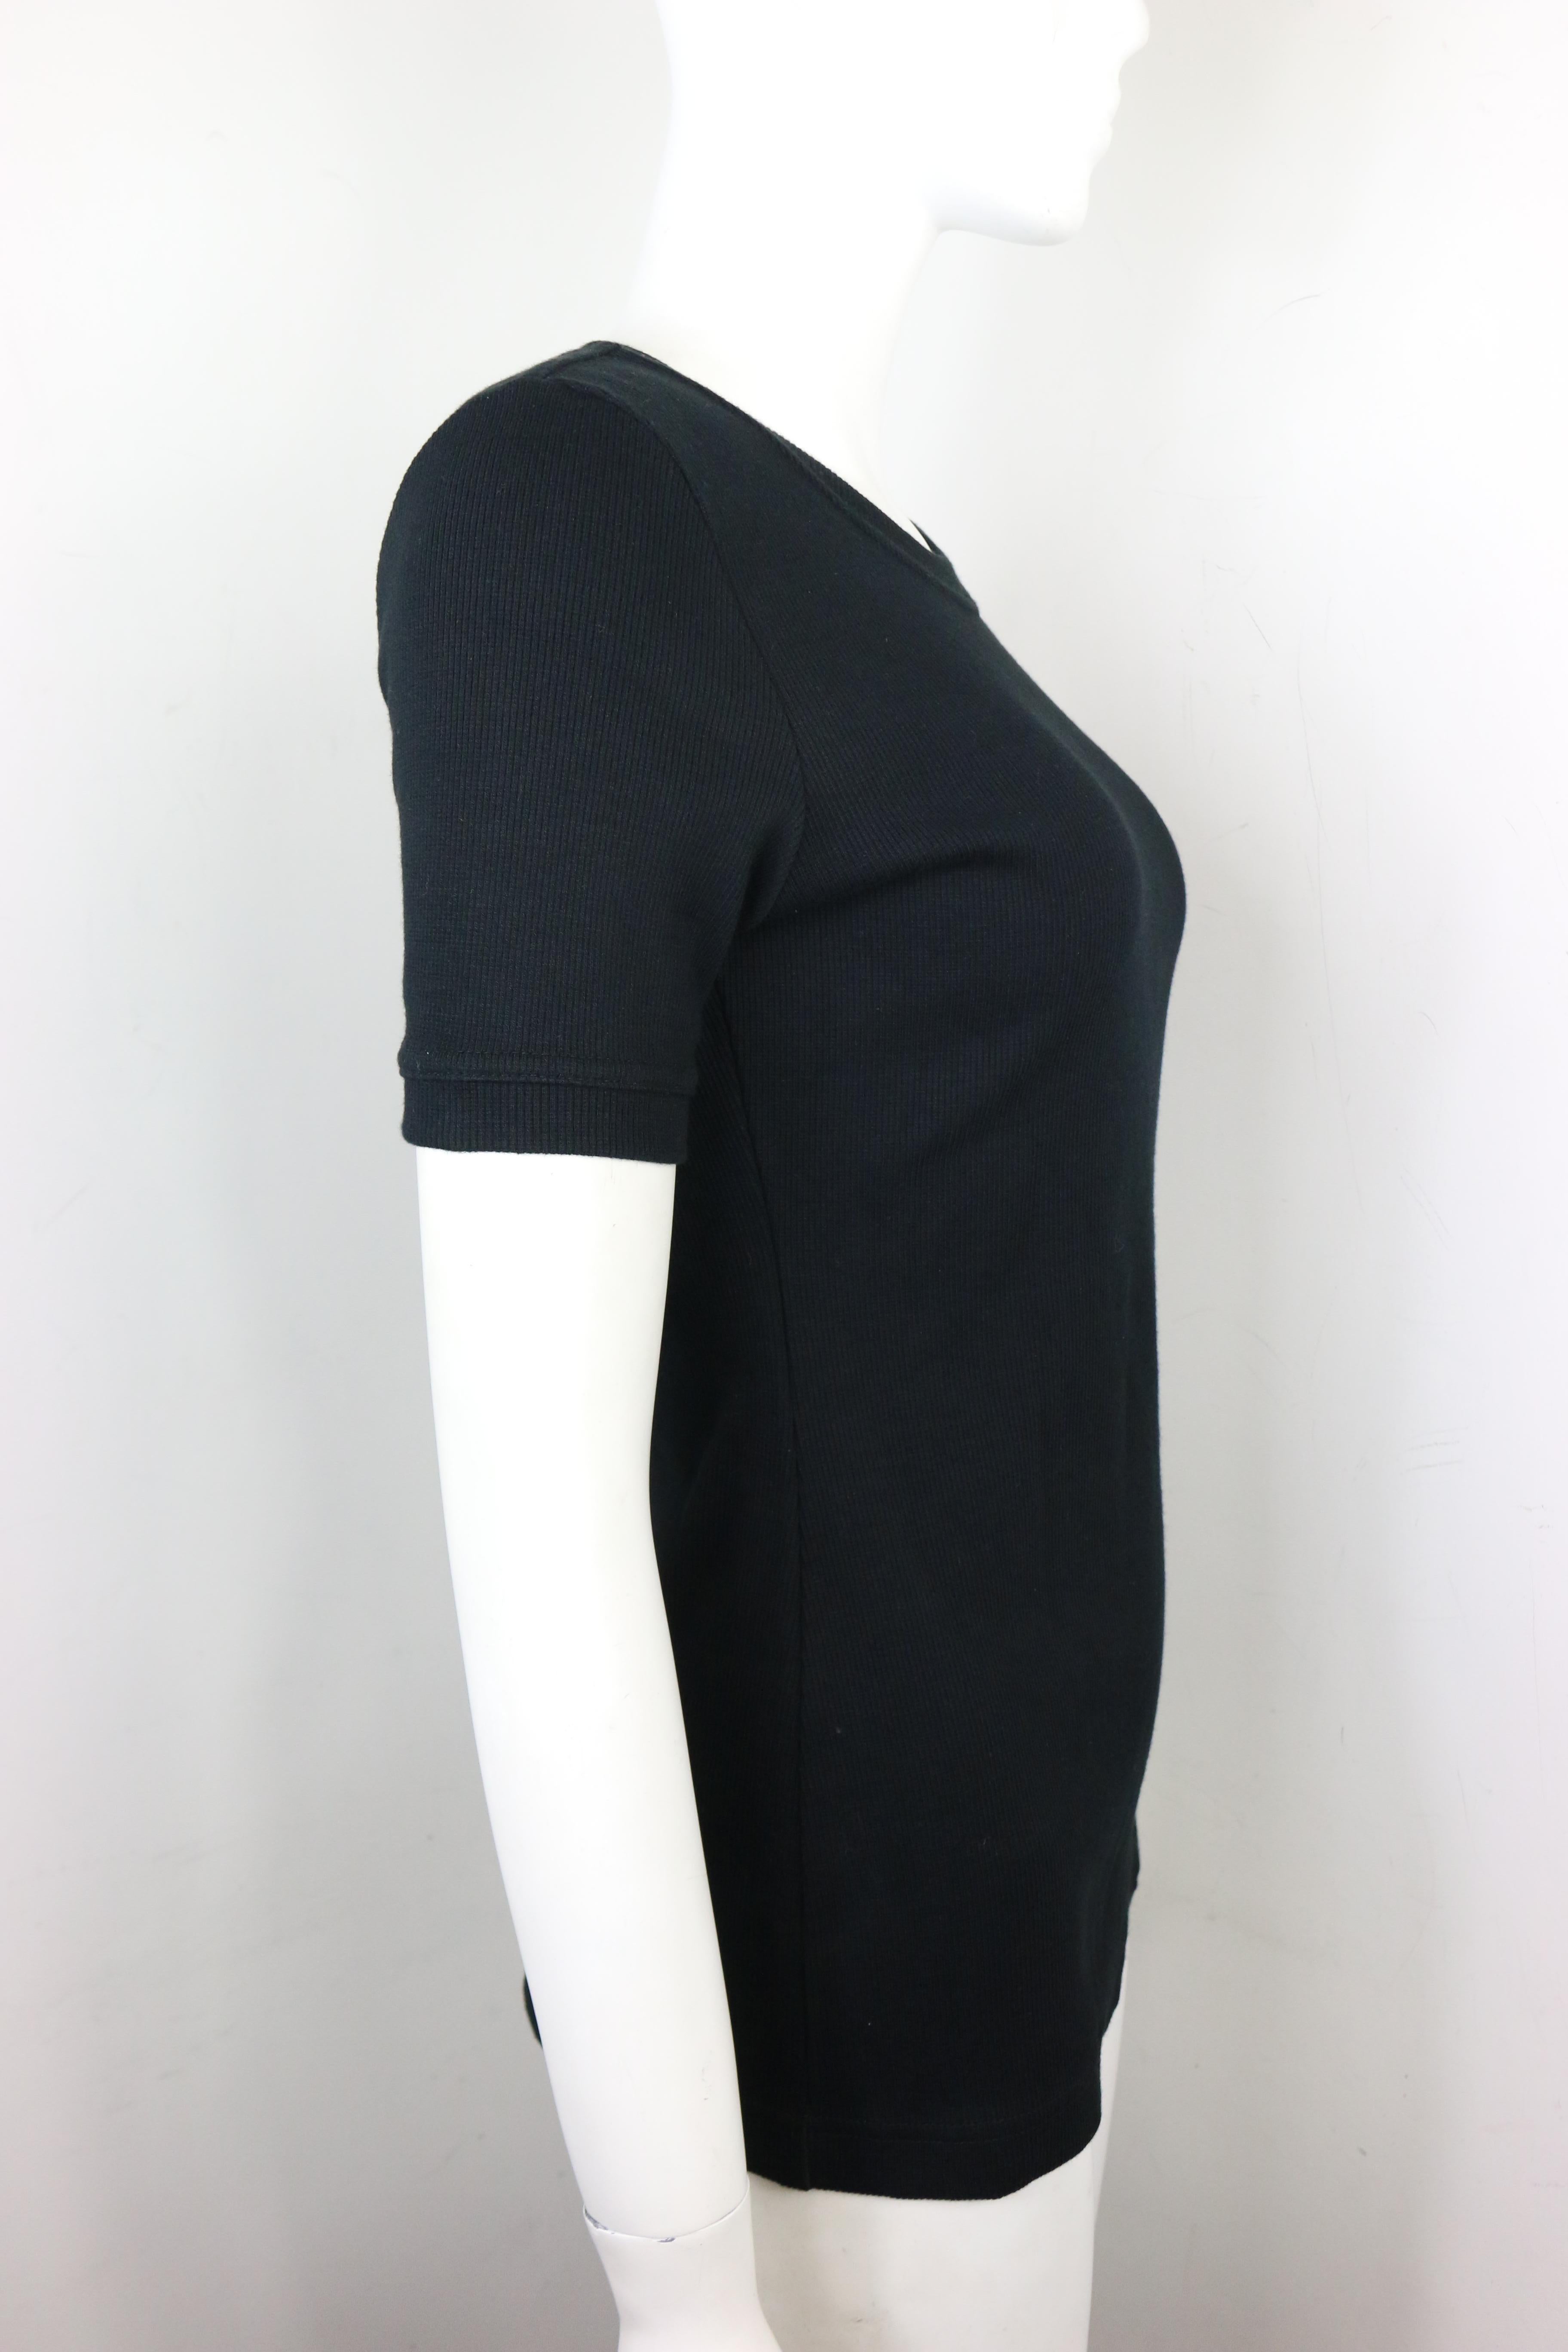 Tom Ford For Gucci Thick Cotton Black Short Sleeves Top  In New Condition For Sale In Sheung Wan, HK